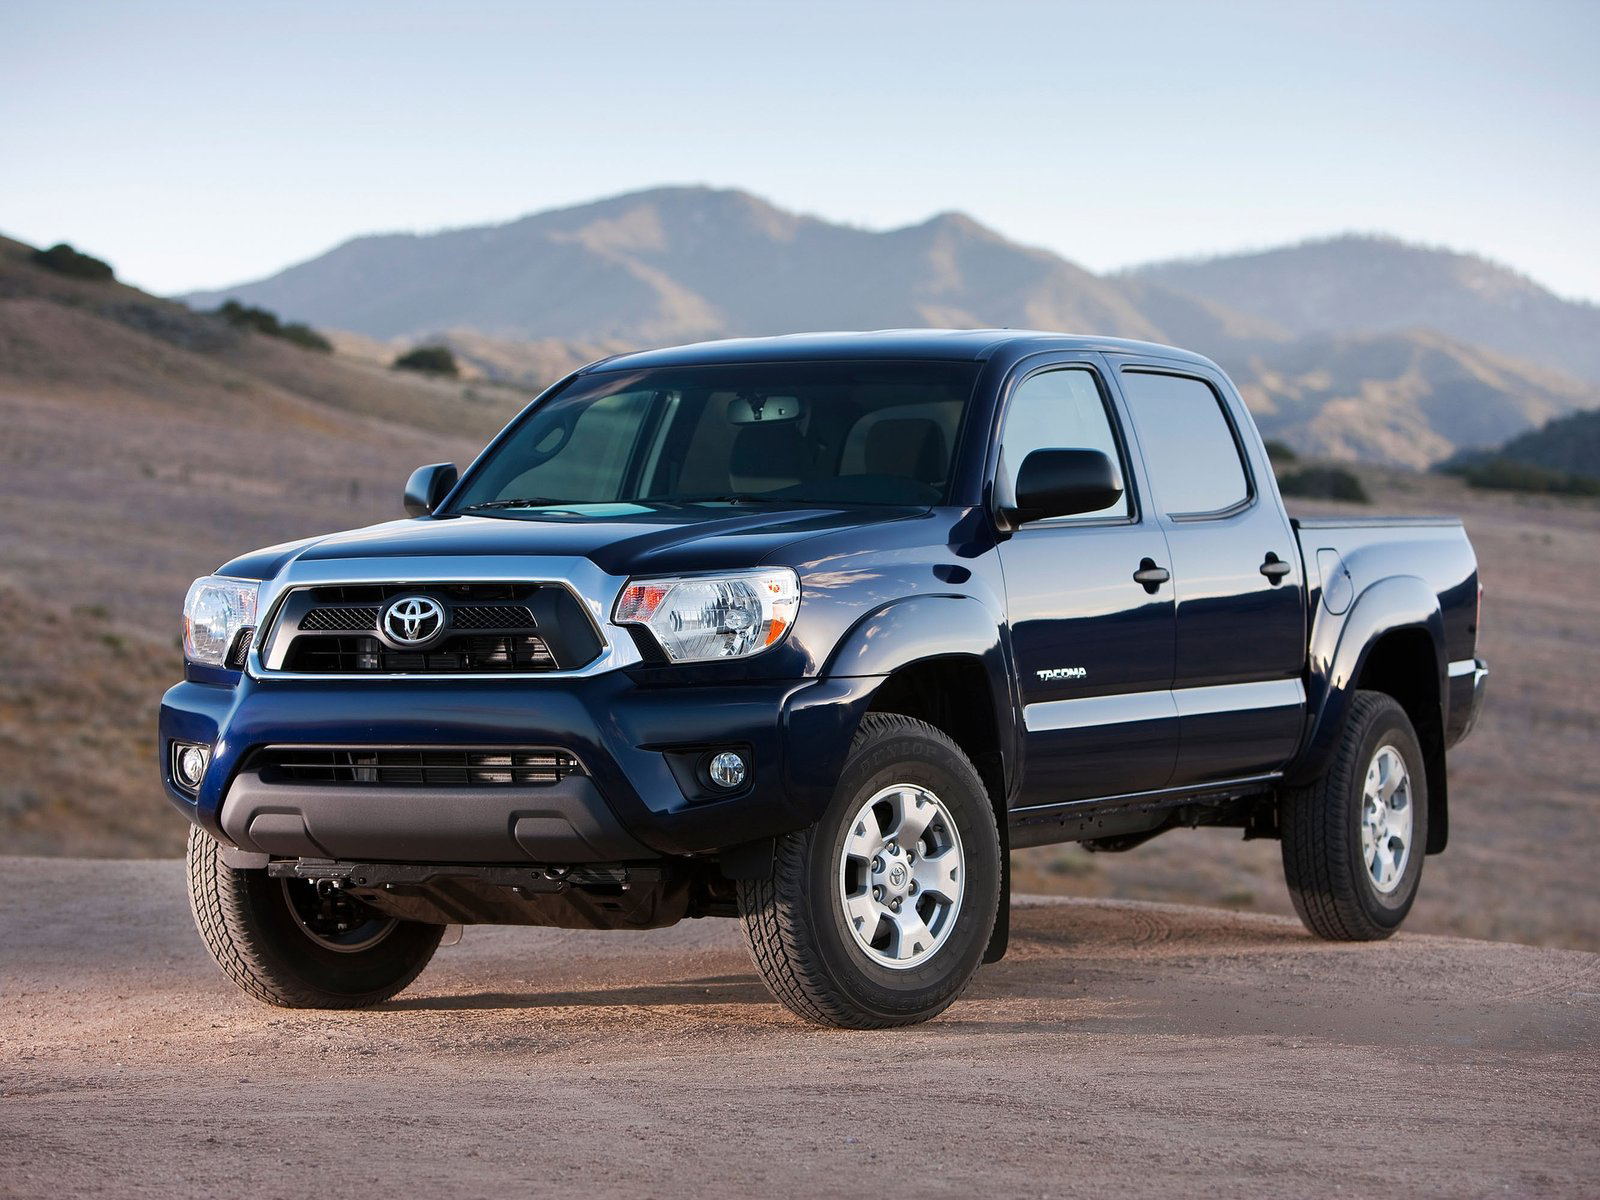 2012 Toyota Tacoma Wallpaper - Toyota Tacoma Used , HD Wallpaper & Backgrounds